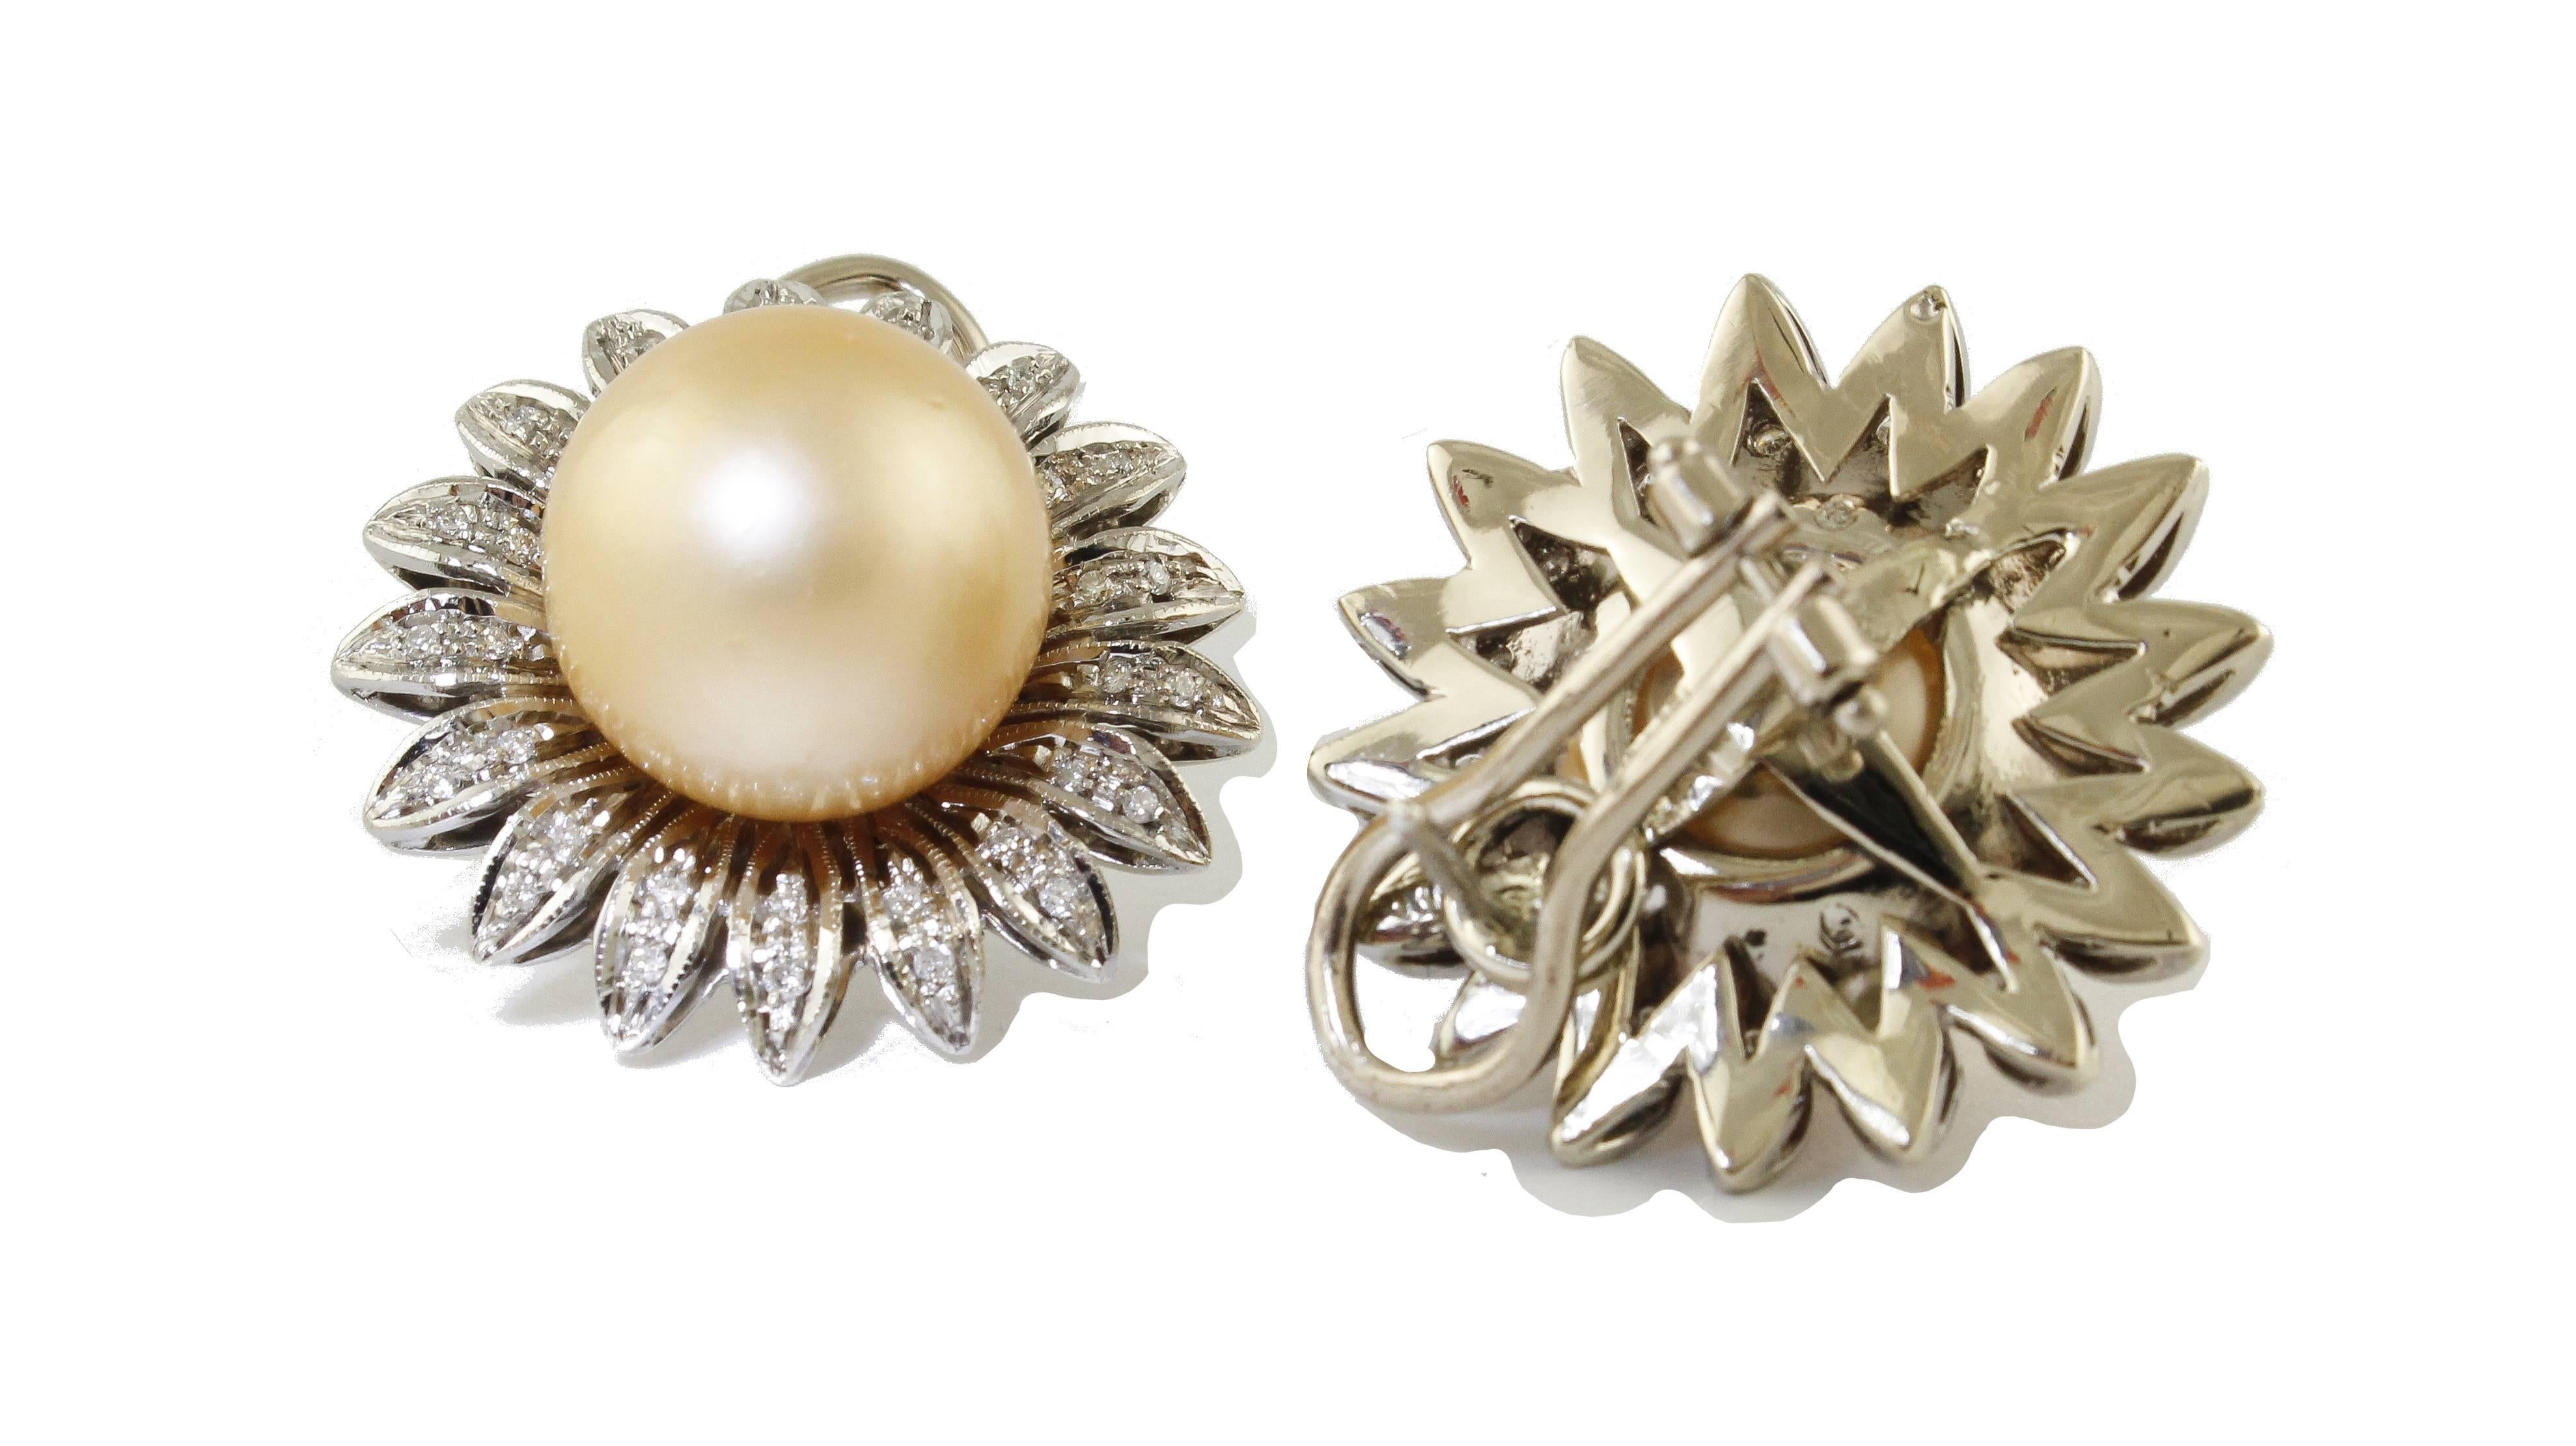 Magnificent 14 kt gold earrings, representing a sun with rays enriched with 0.45 ct diamonds and a fabulous central Australian pearl of 7.4 grams 14. Total weight g 20.75.
Diamonds ct 0.45
Pearls gr 7.4 mm 14
Total weight g 20.75.
RF + ucug

For any